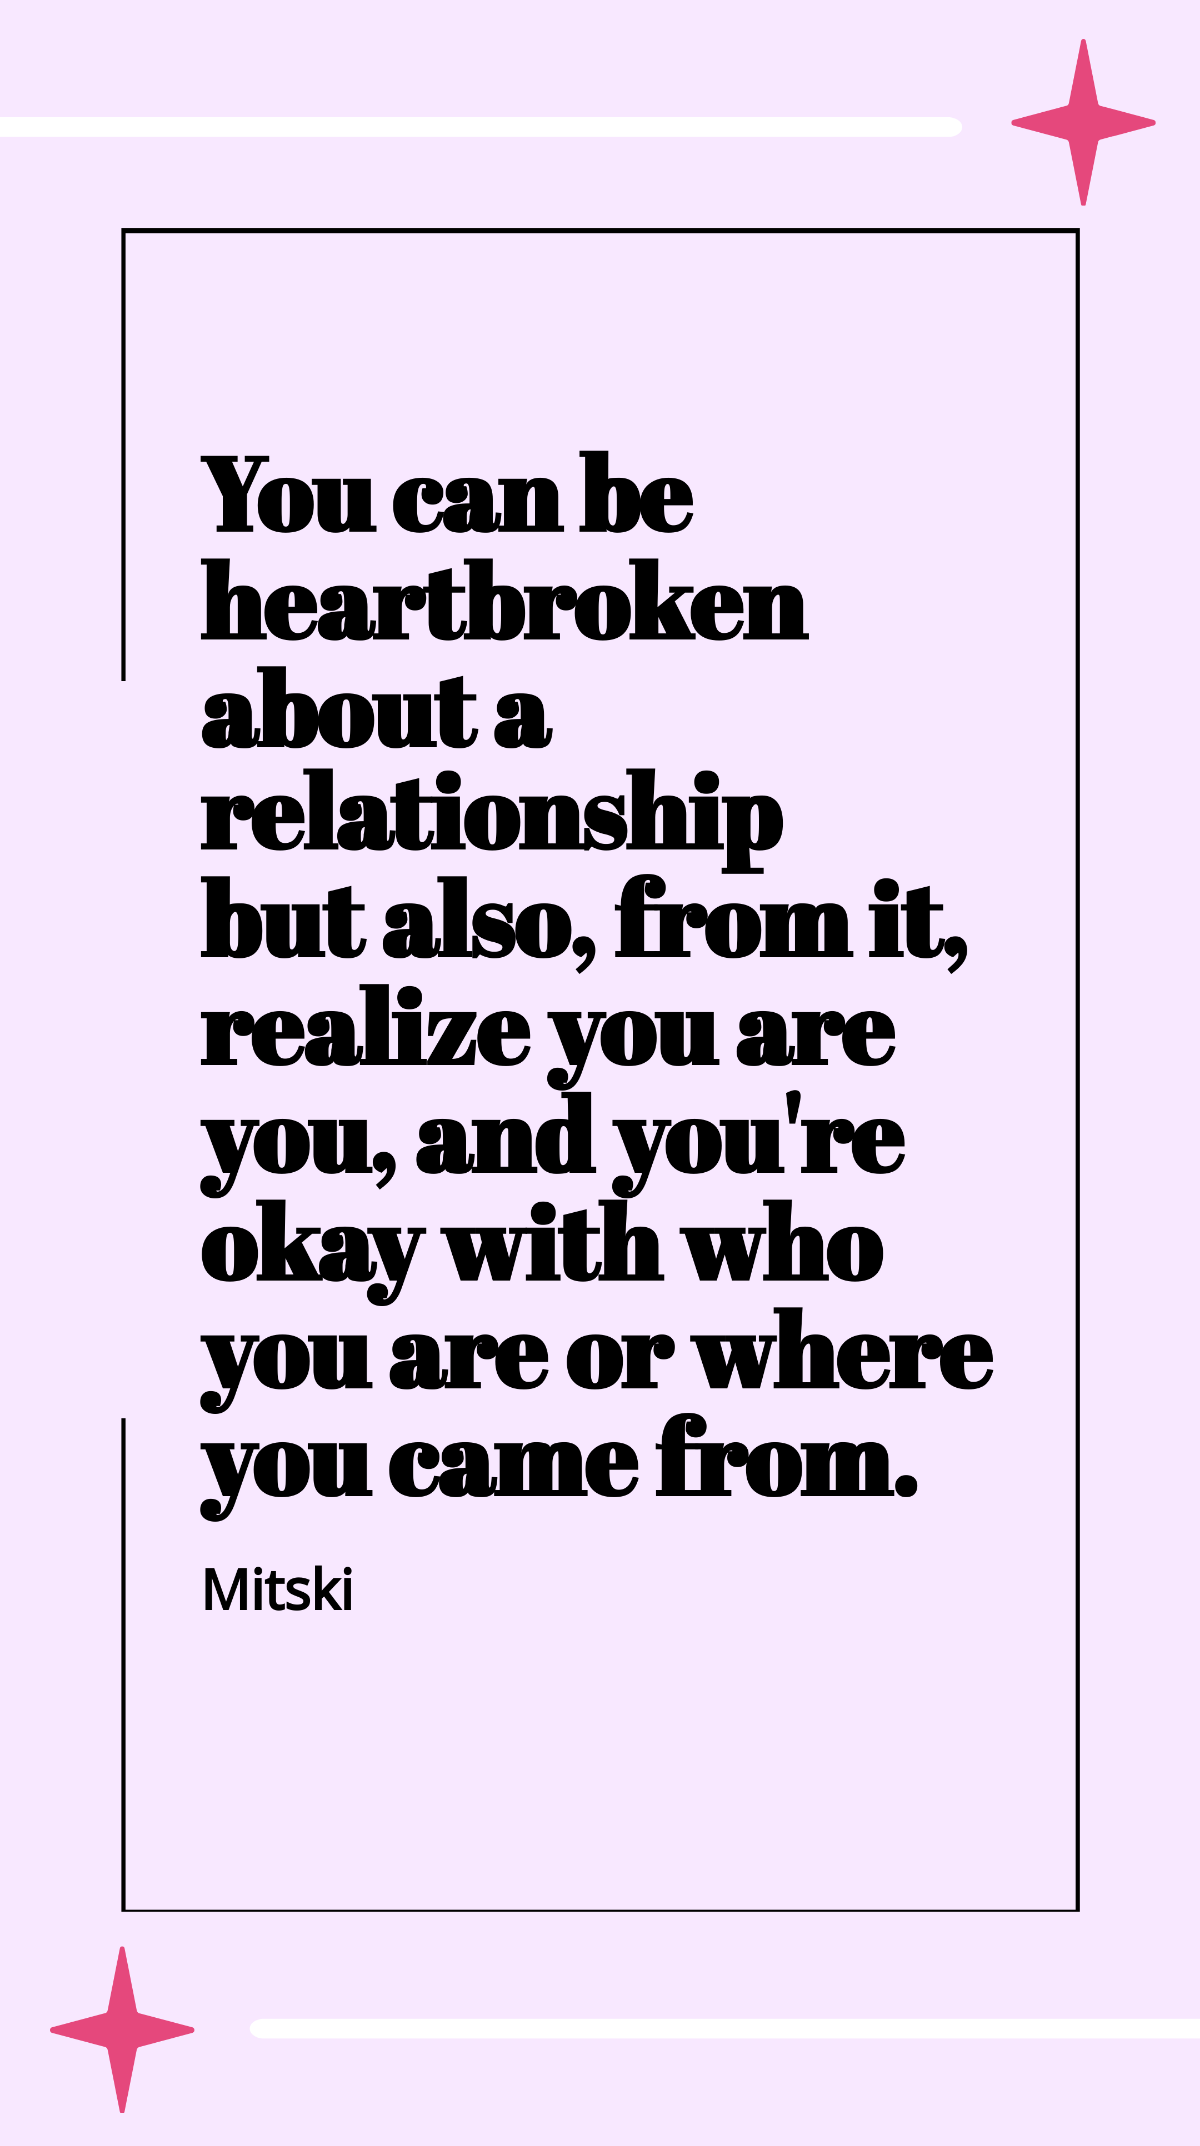 Mitski - You can be heartbroken about a relationship but also, from it, realize you are you, and you're okay with who you are or where you came from. Template